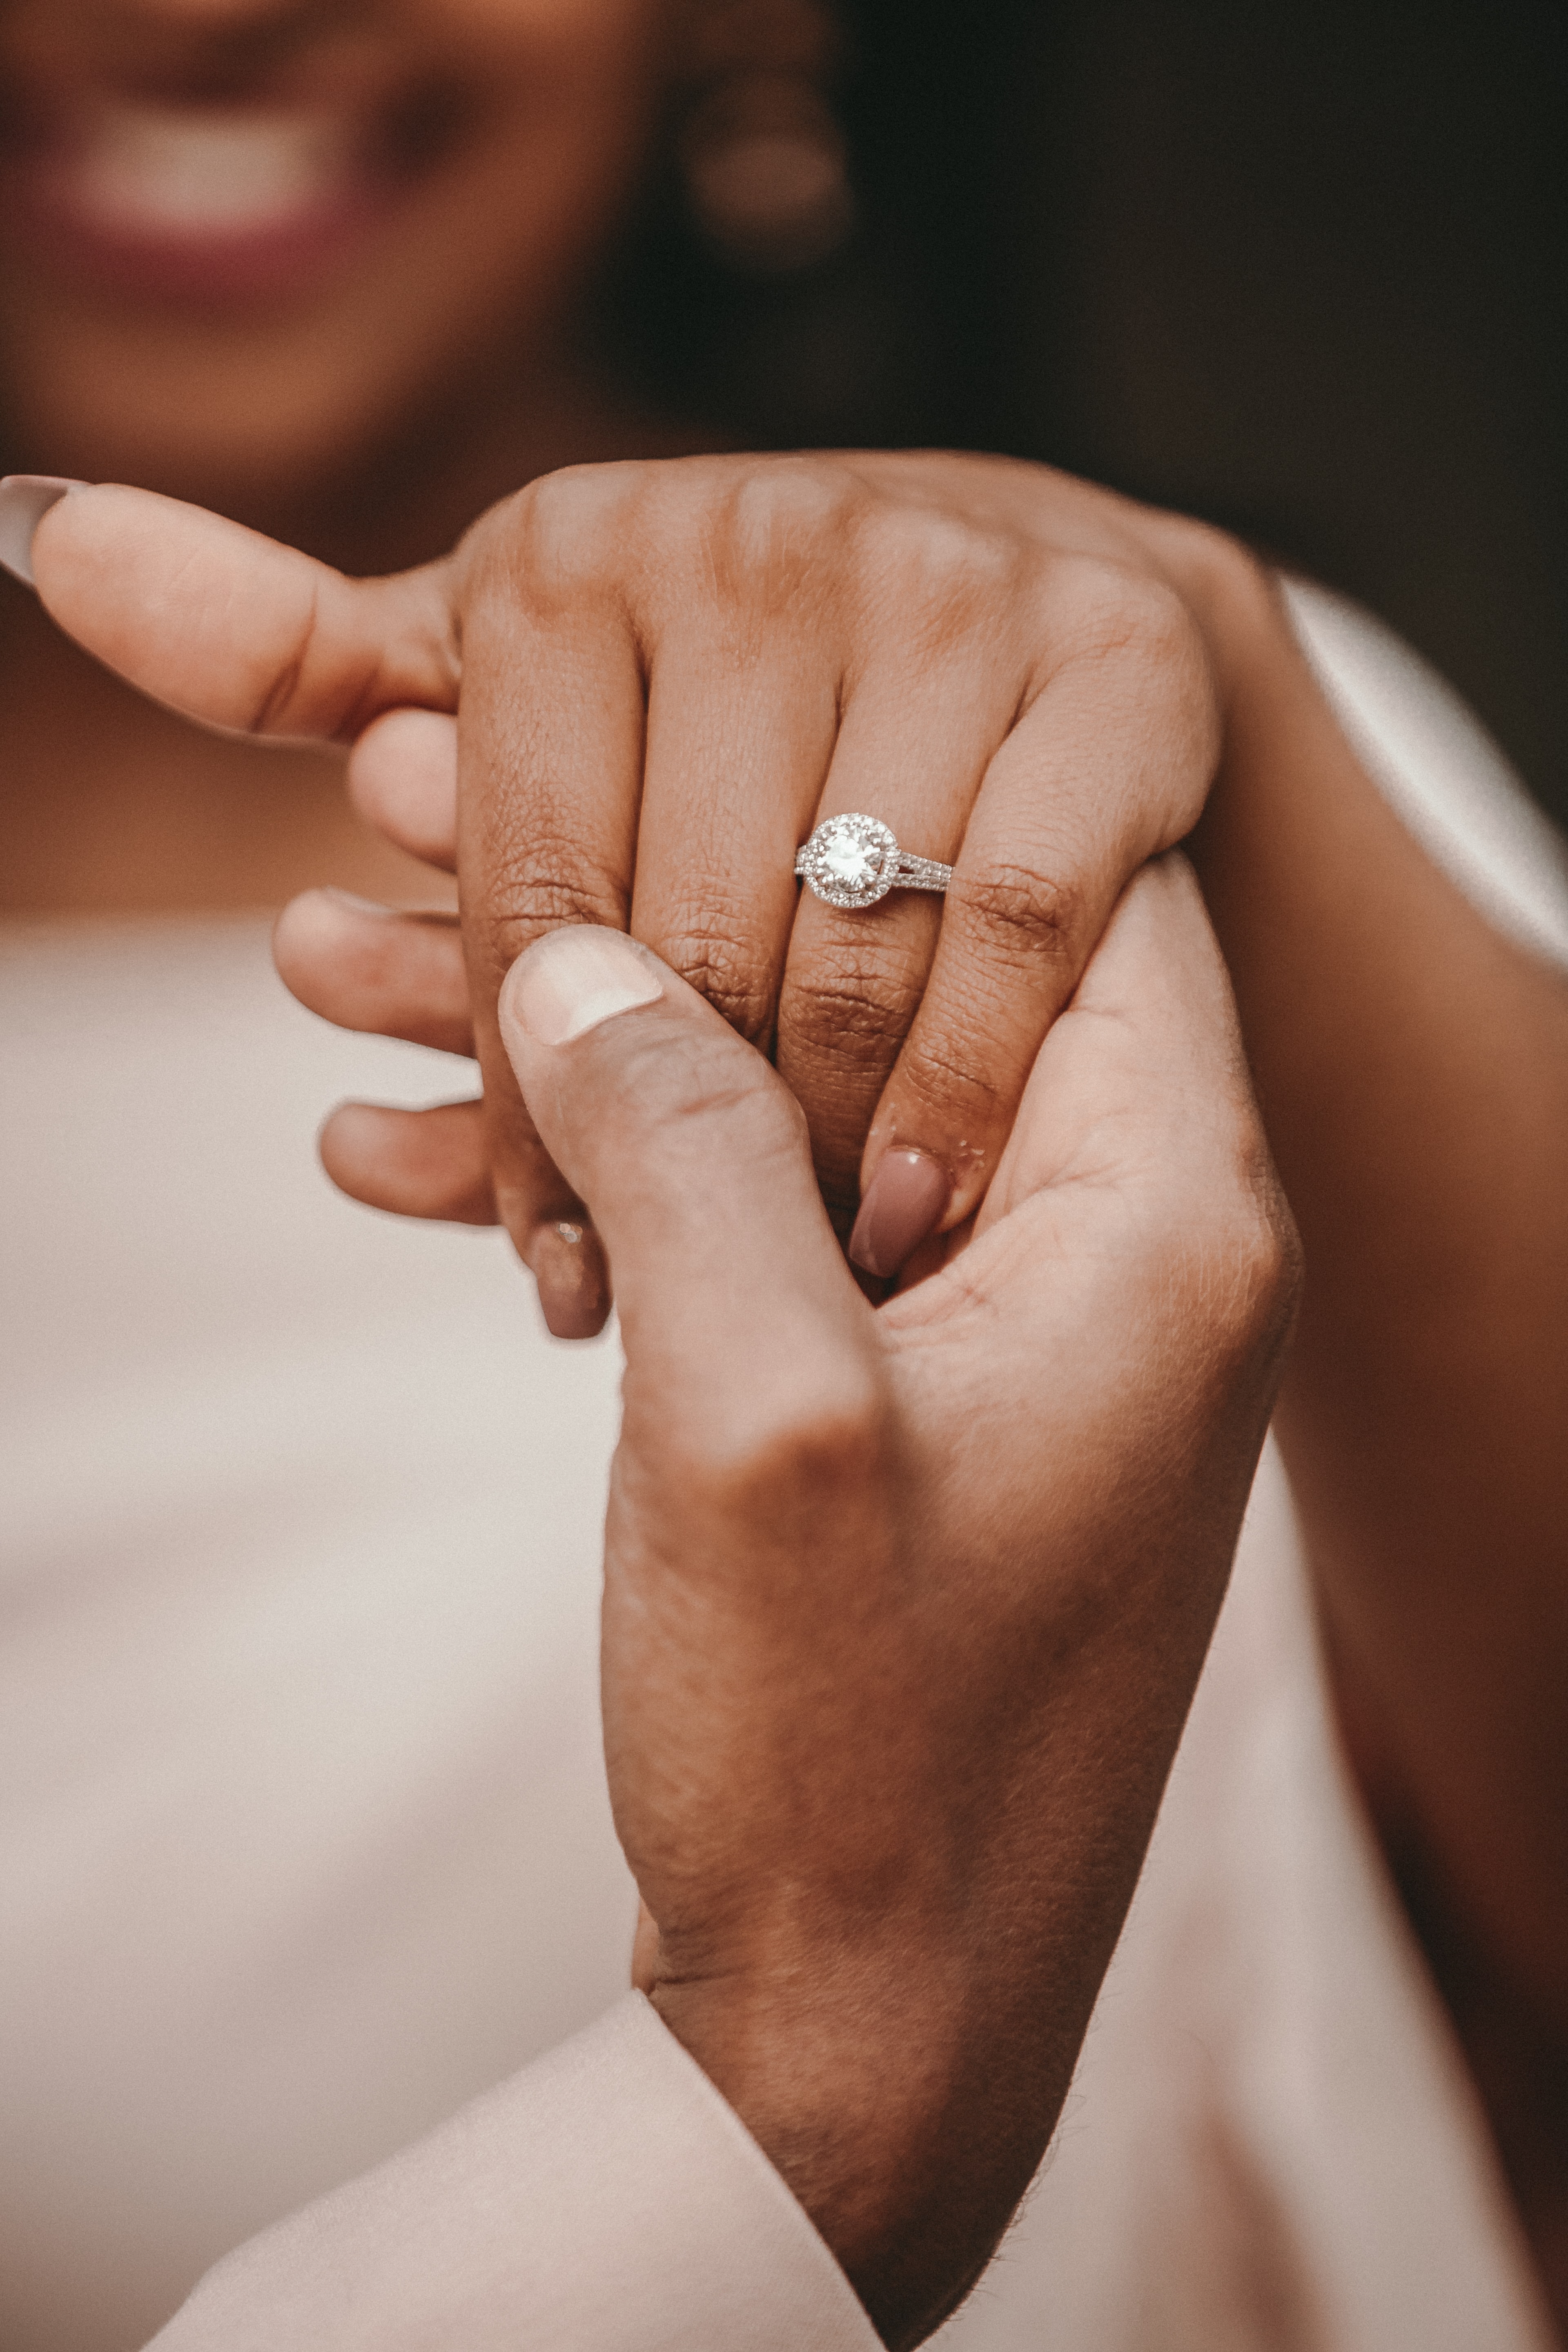 Choose an Engagement Ring She’ll Really Love